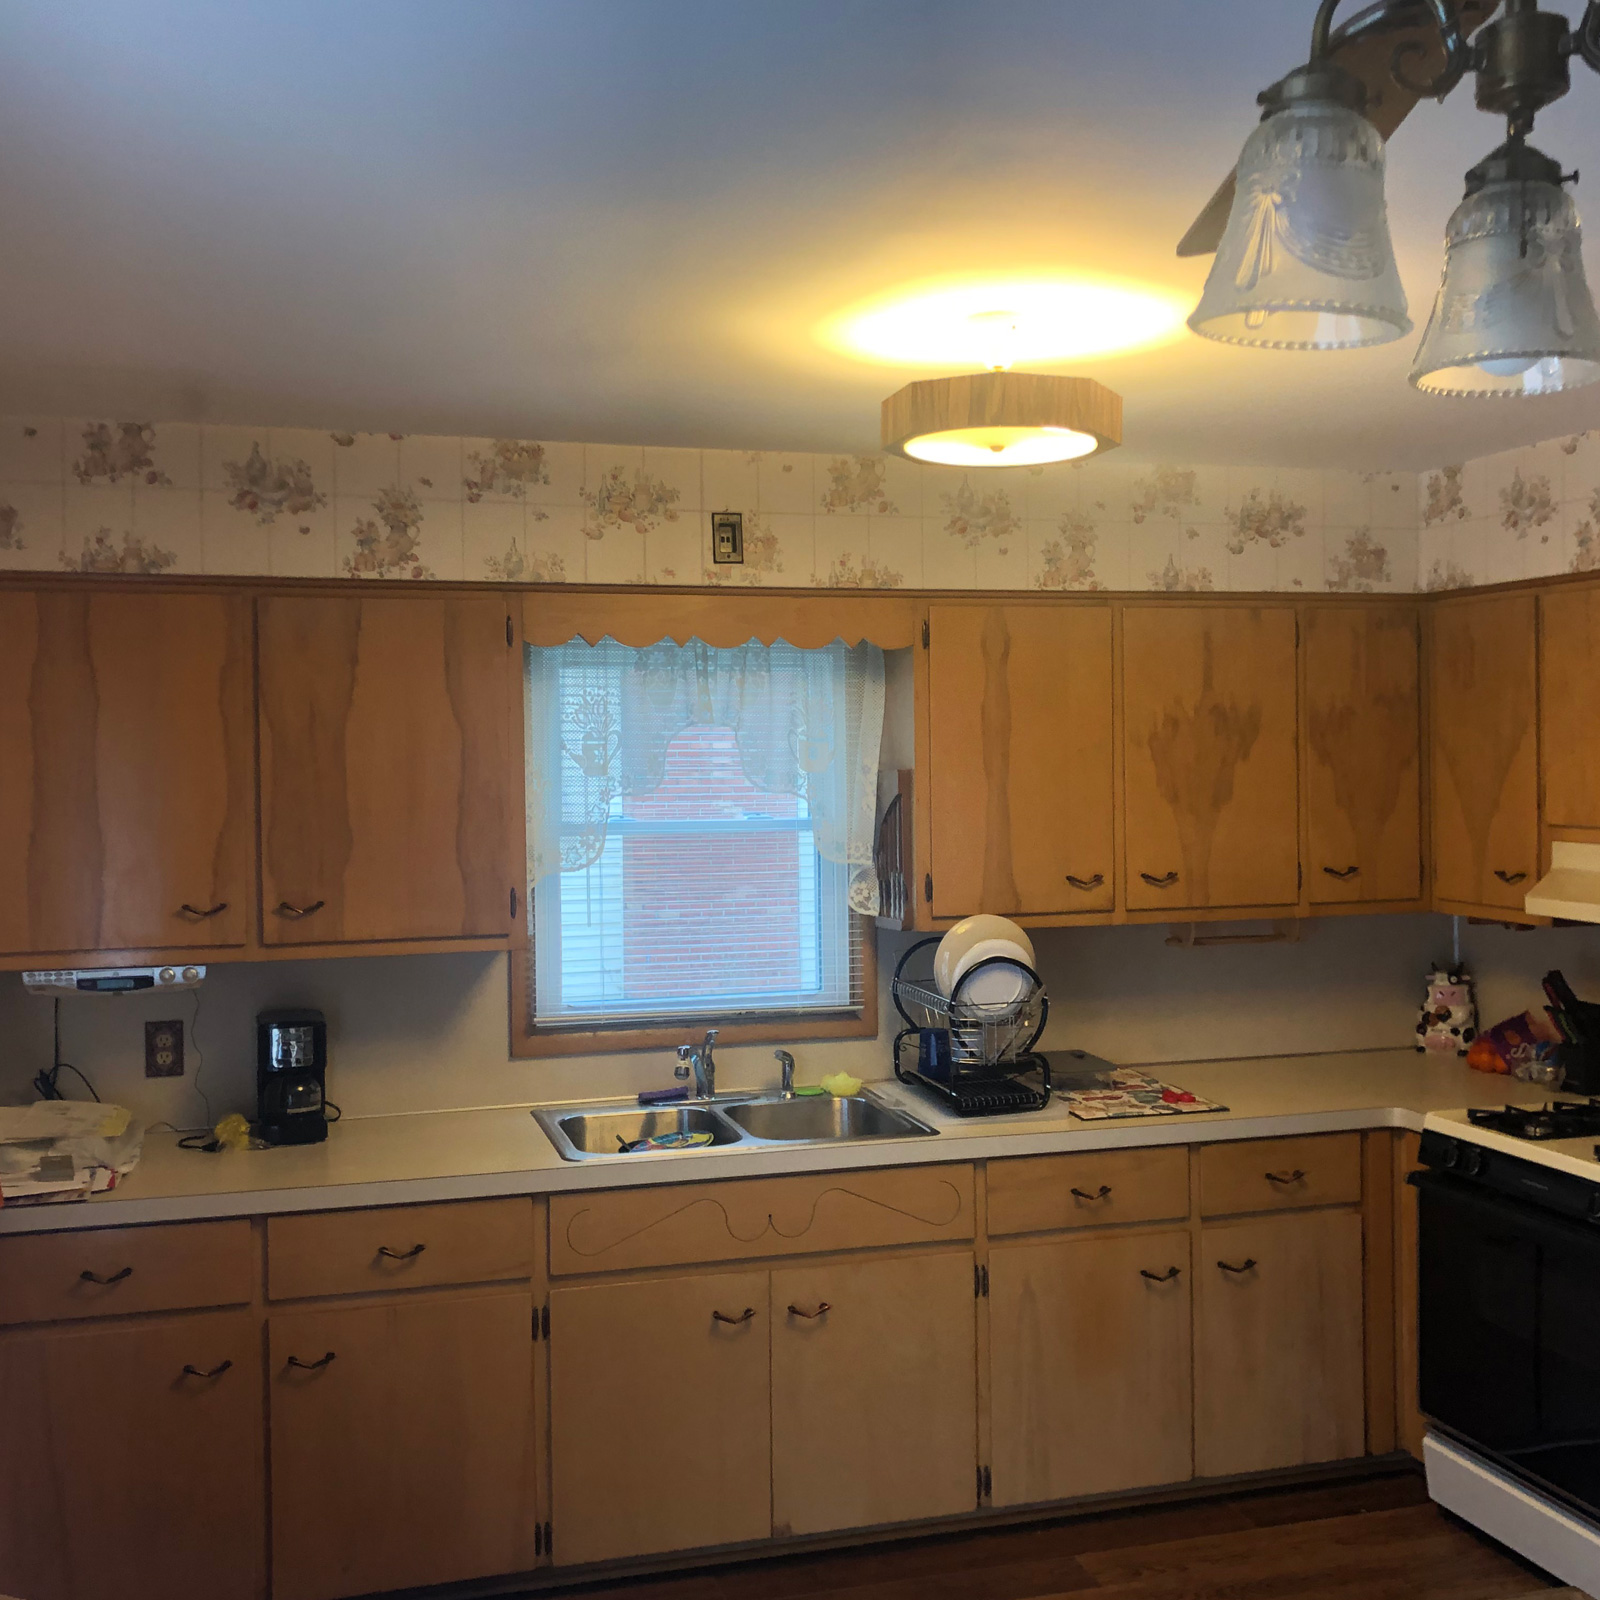 Entry 124 - It's time to replace this tired, white painted cabinetry